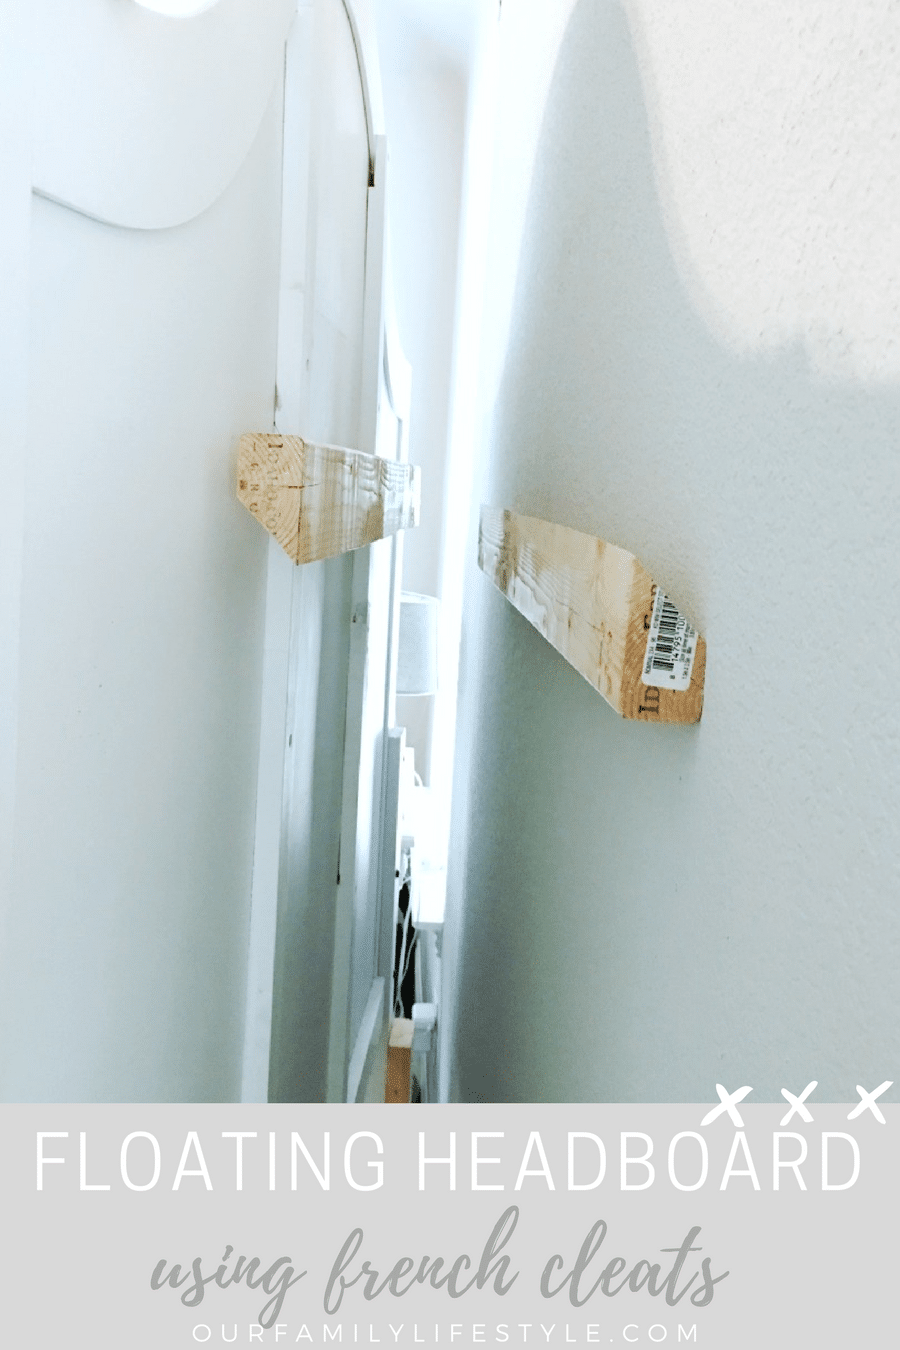 How To Mount A Headboard The Wall Using French Cleats - Can I Attach Headboard To Wall